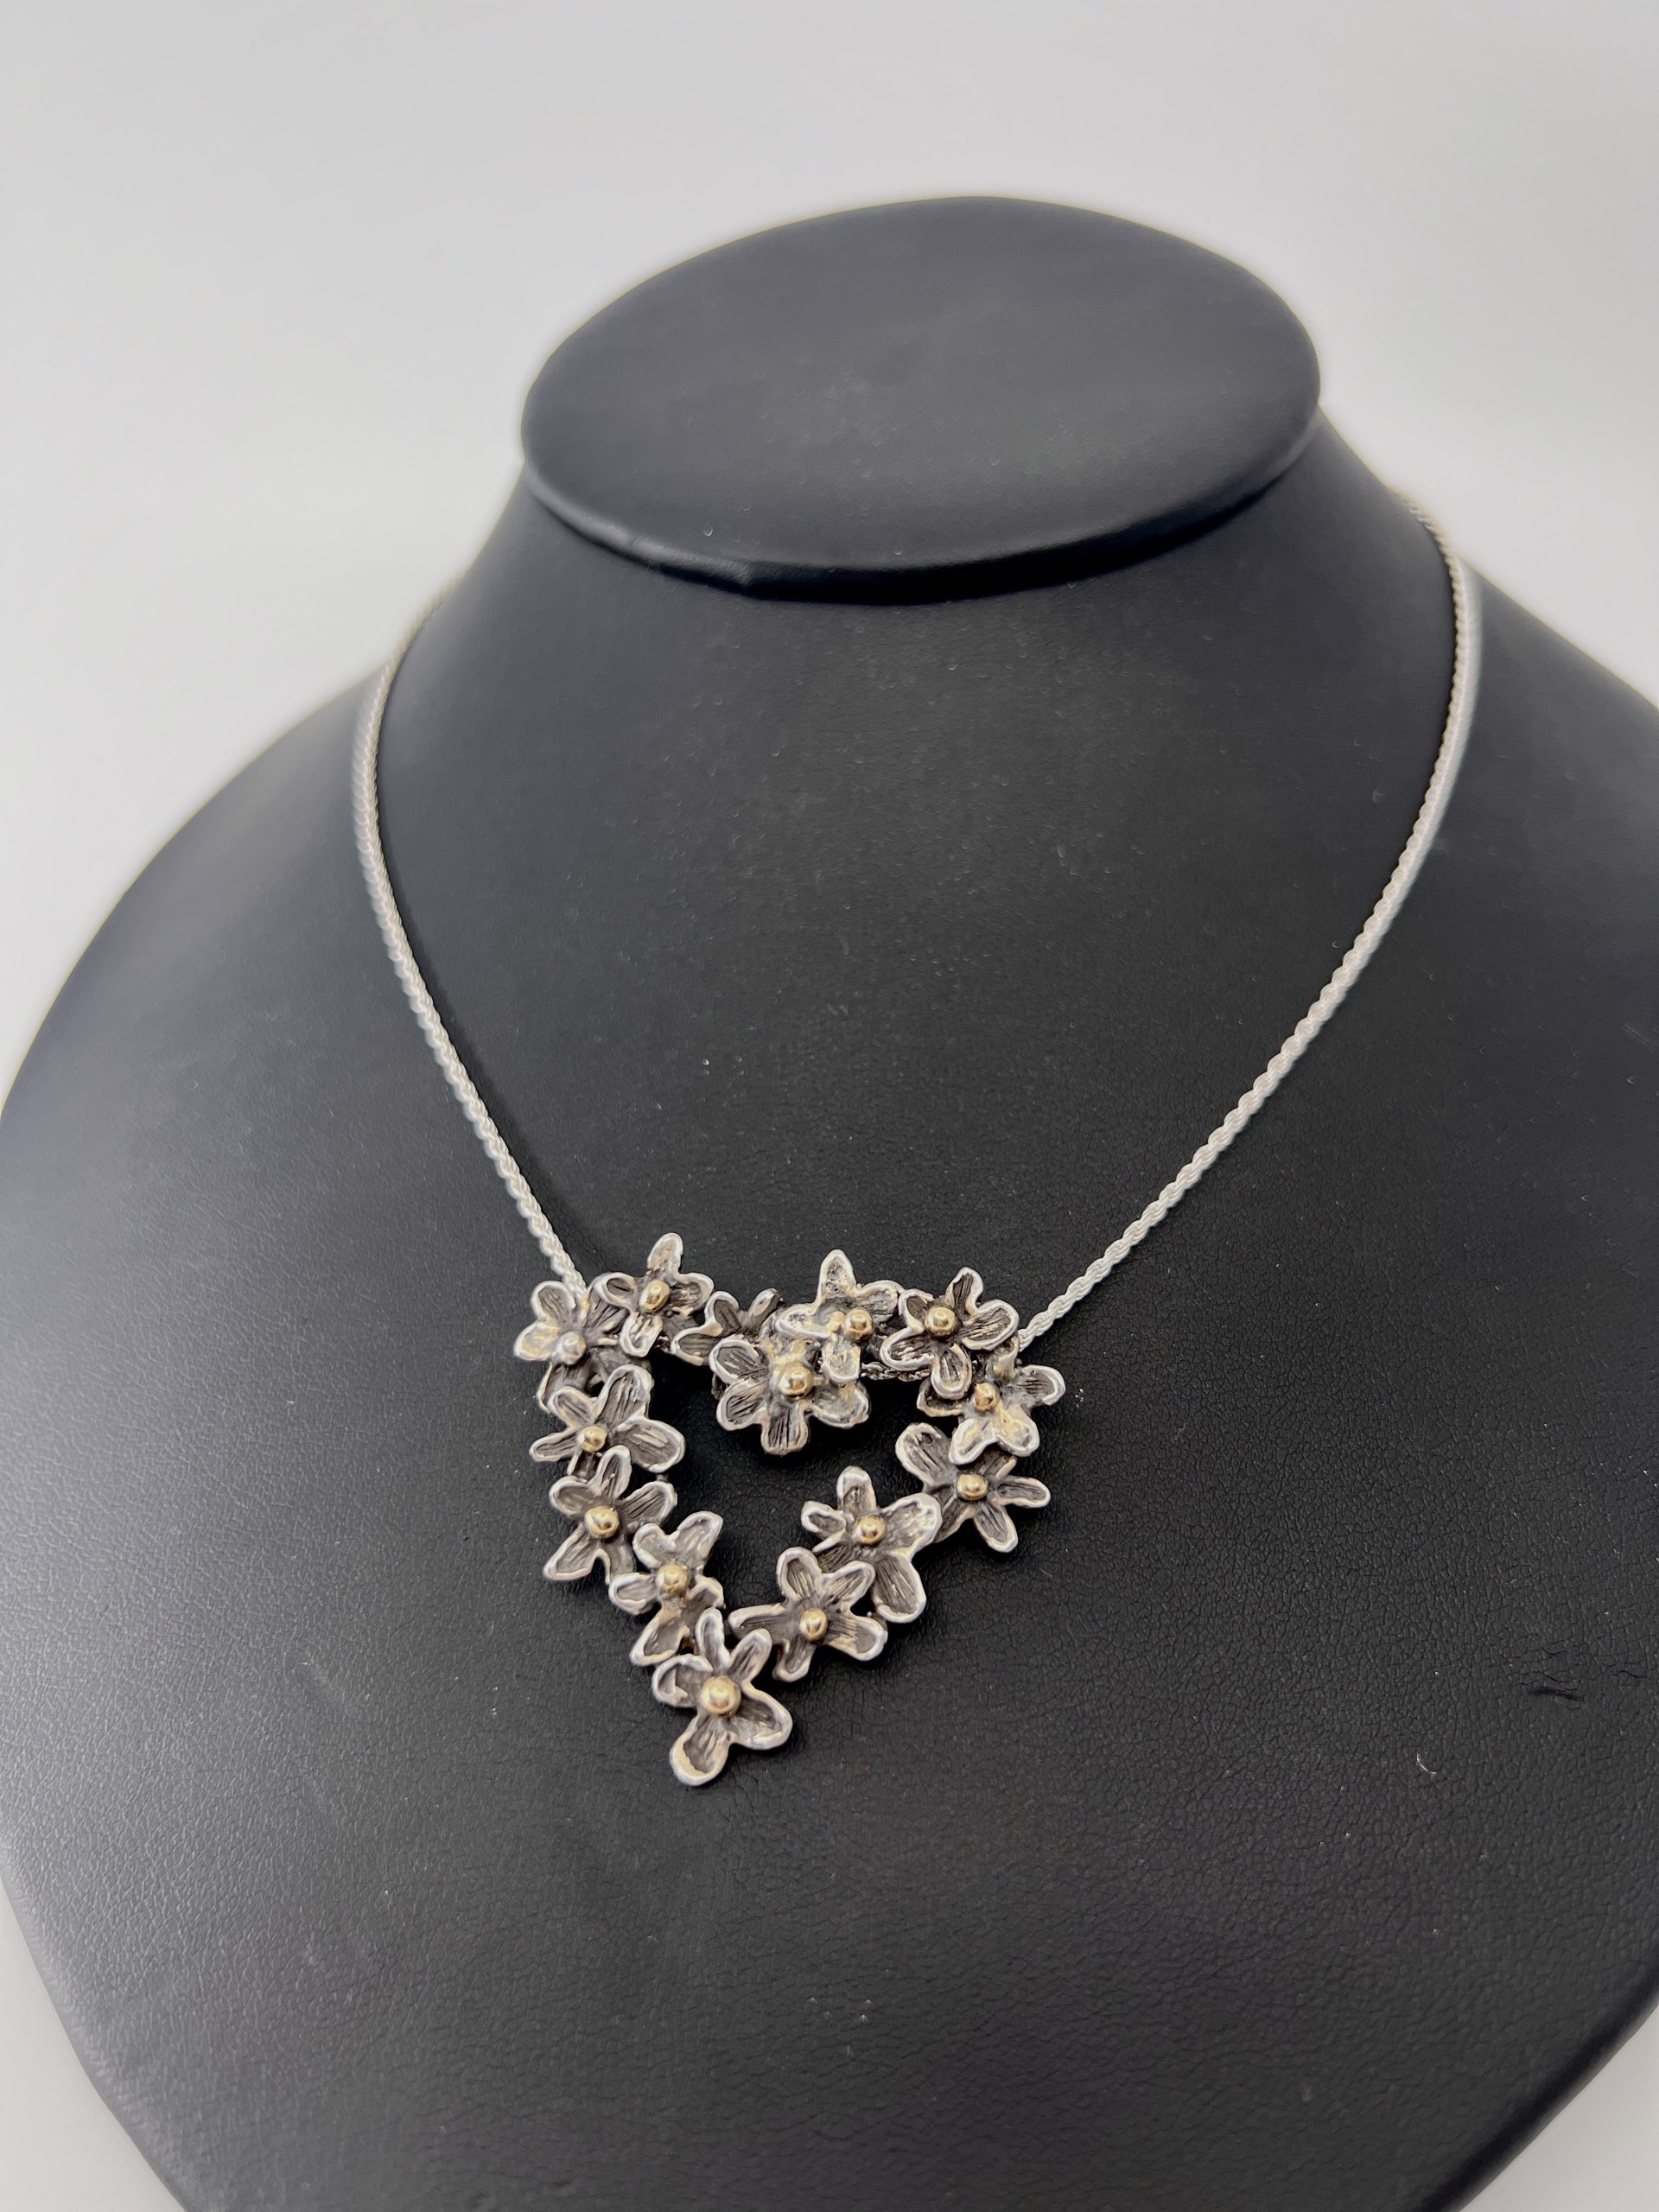 22k Gold and Sterling Silver Flower Heart with Chain Necklace by Beth Benowich